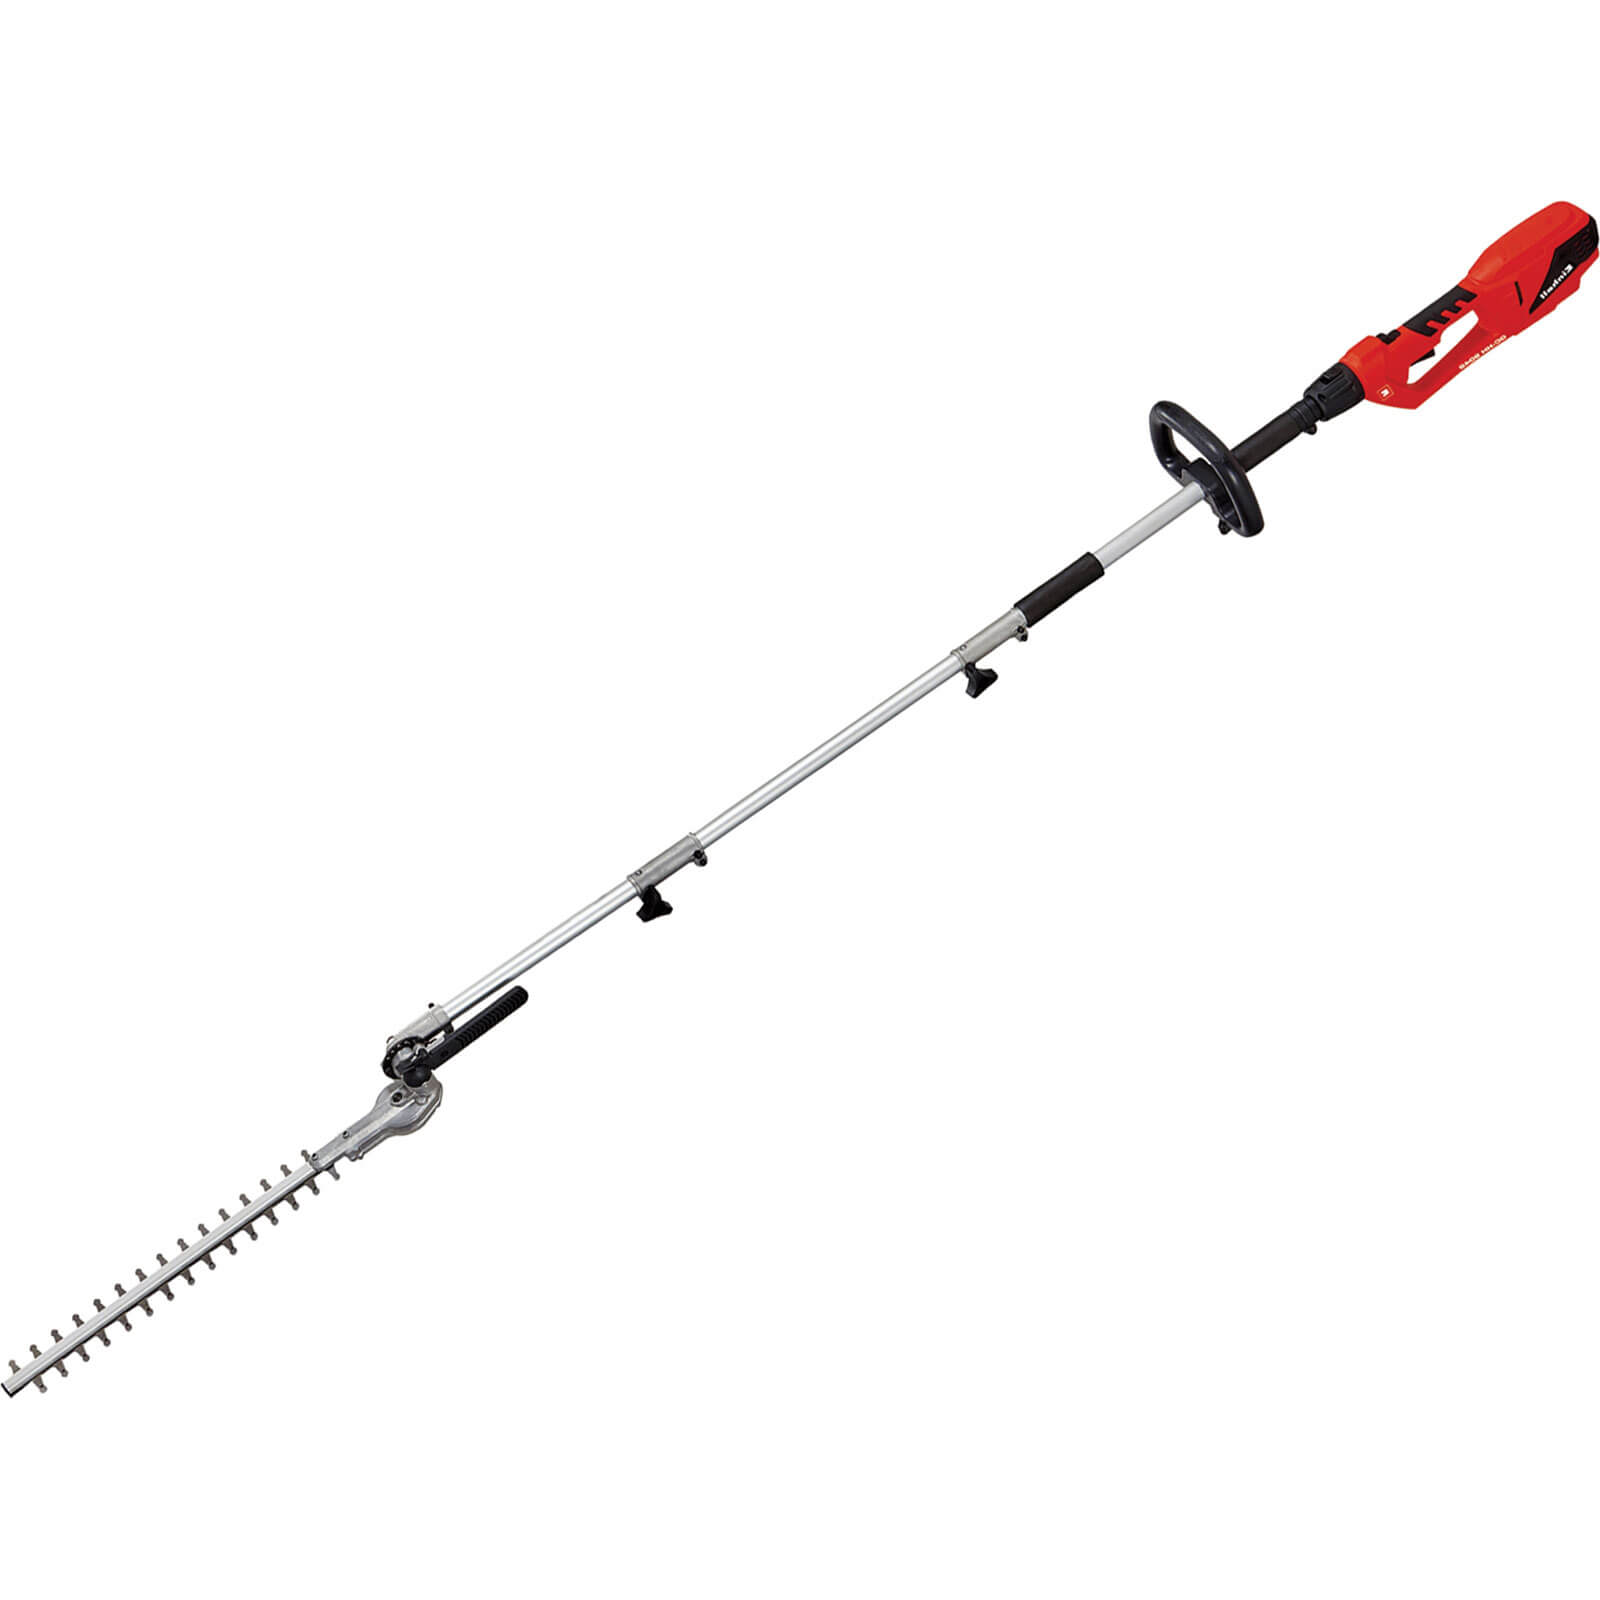 Photo of Einhell Gc-hh 9048 Telescopic Pole Hedge Trimmer 410mm 240v